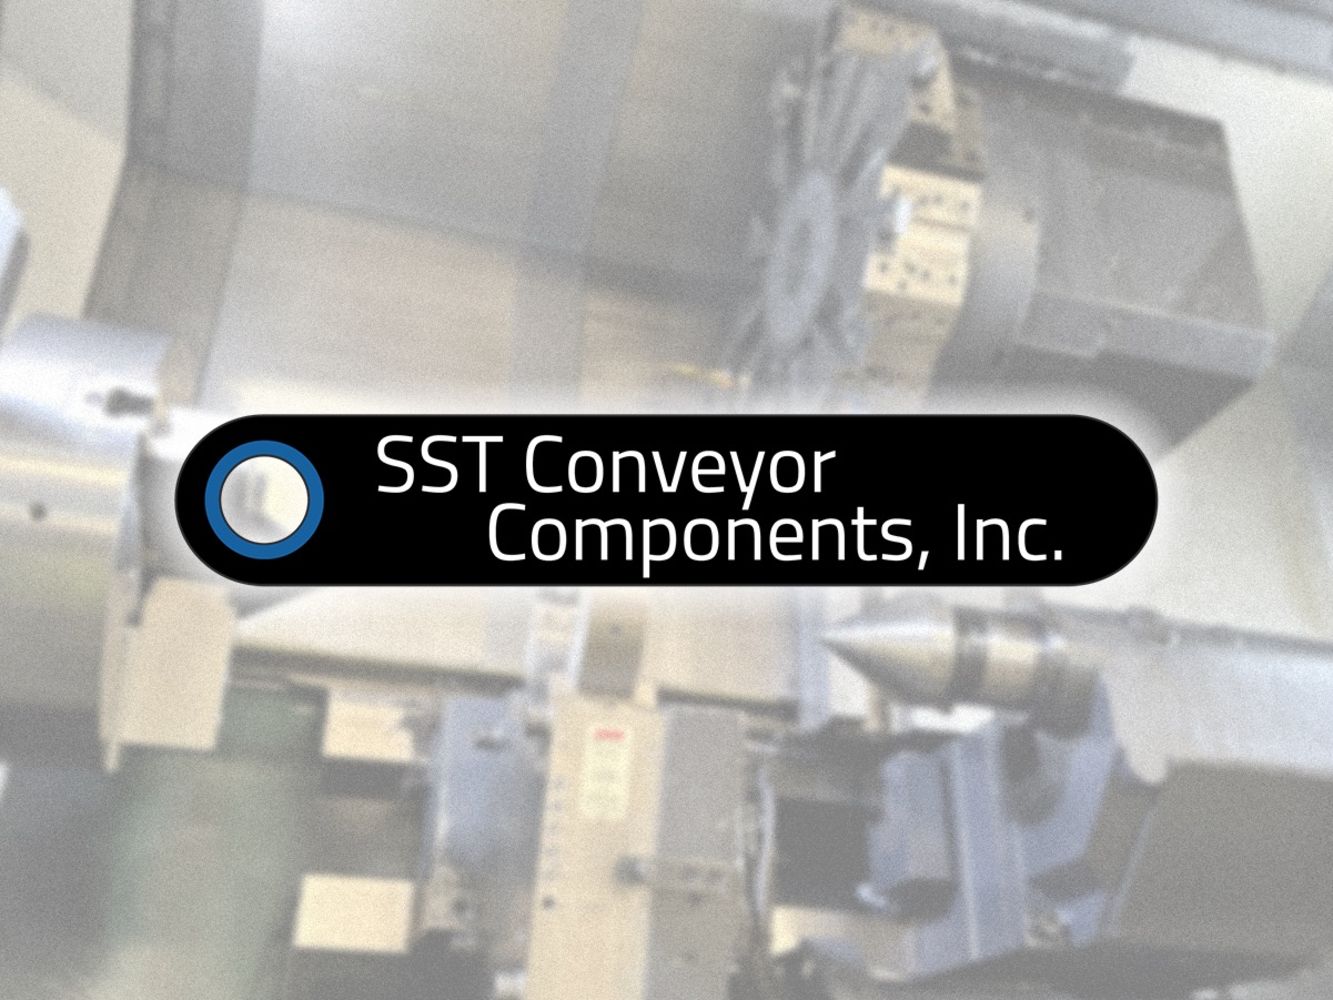 Specialty Tube Forming, CNC Machine Tools, Injection Molders - SST Conveyor Components, Cincinnati OH